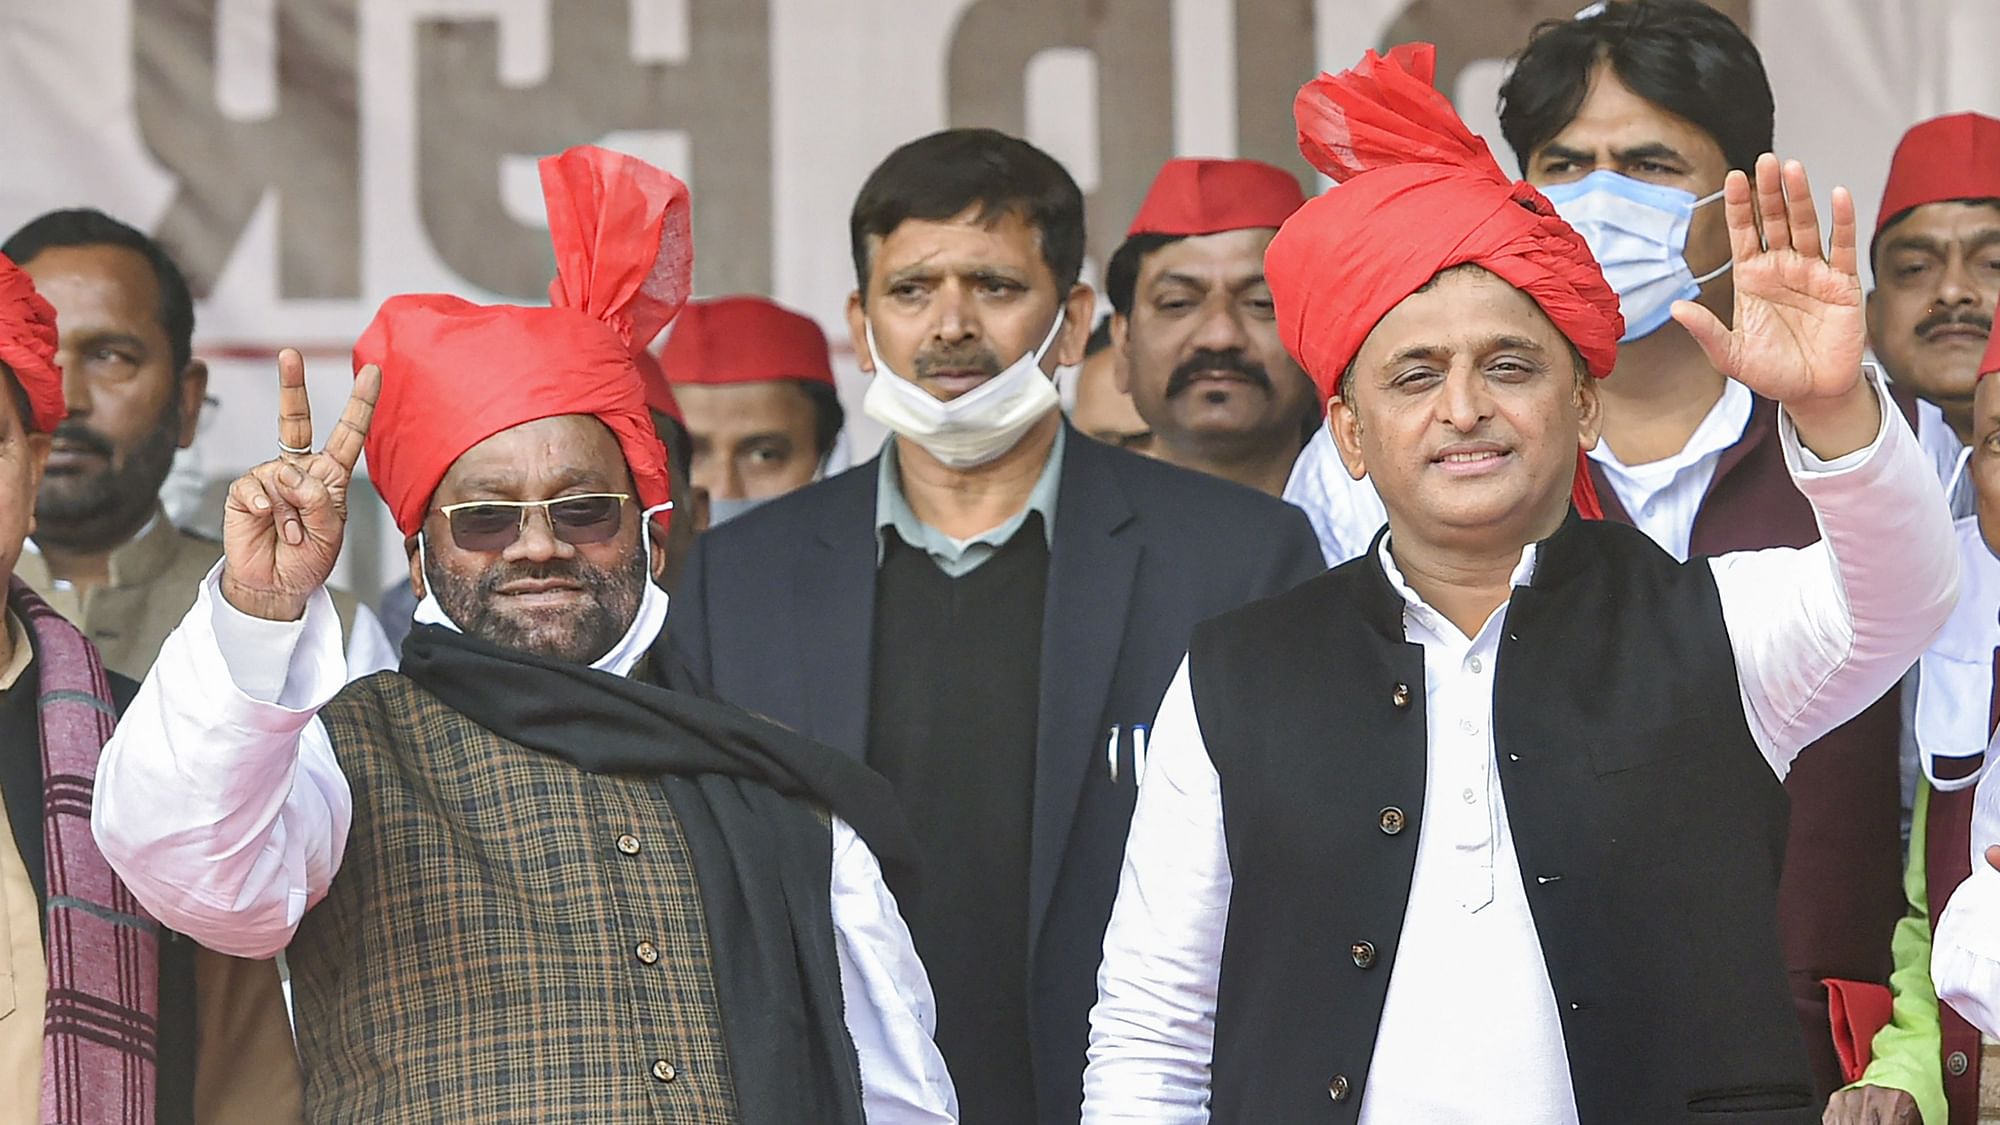 <div class="paragraphs"><p>The Uttar Pradesh Police on Friday, 14 January, lodged a case against 2,000-2,500 Samajawadi Party activists for gathering at the party's office in violation of the COVID-19 norms.</p></div>